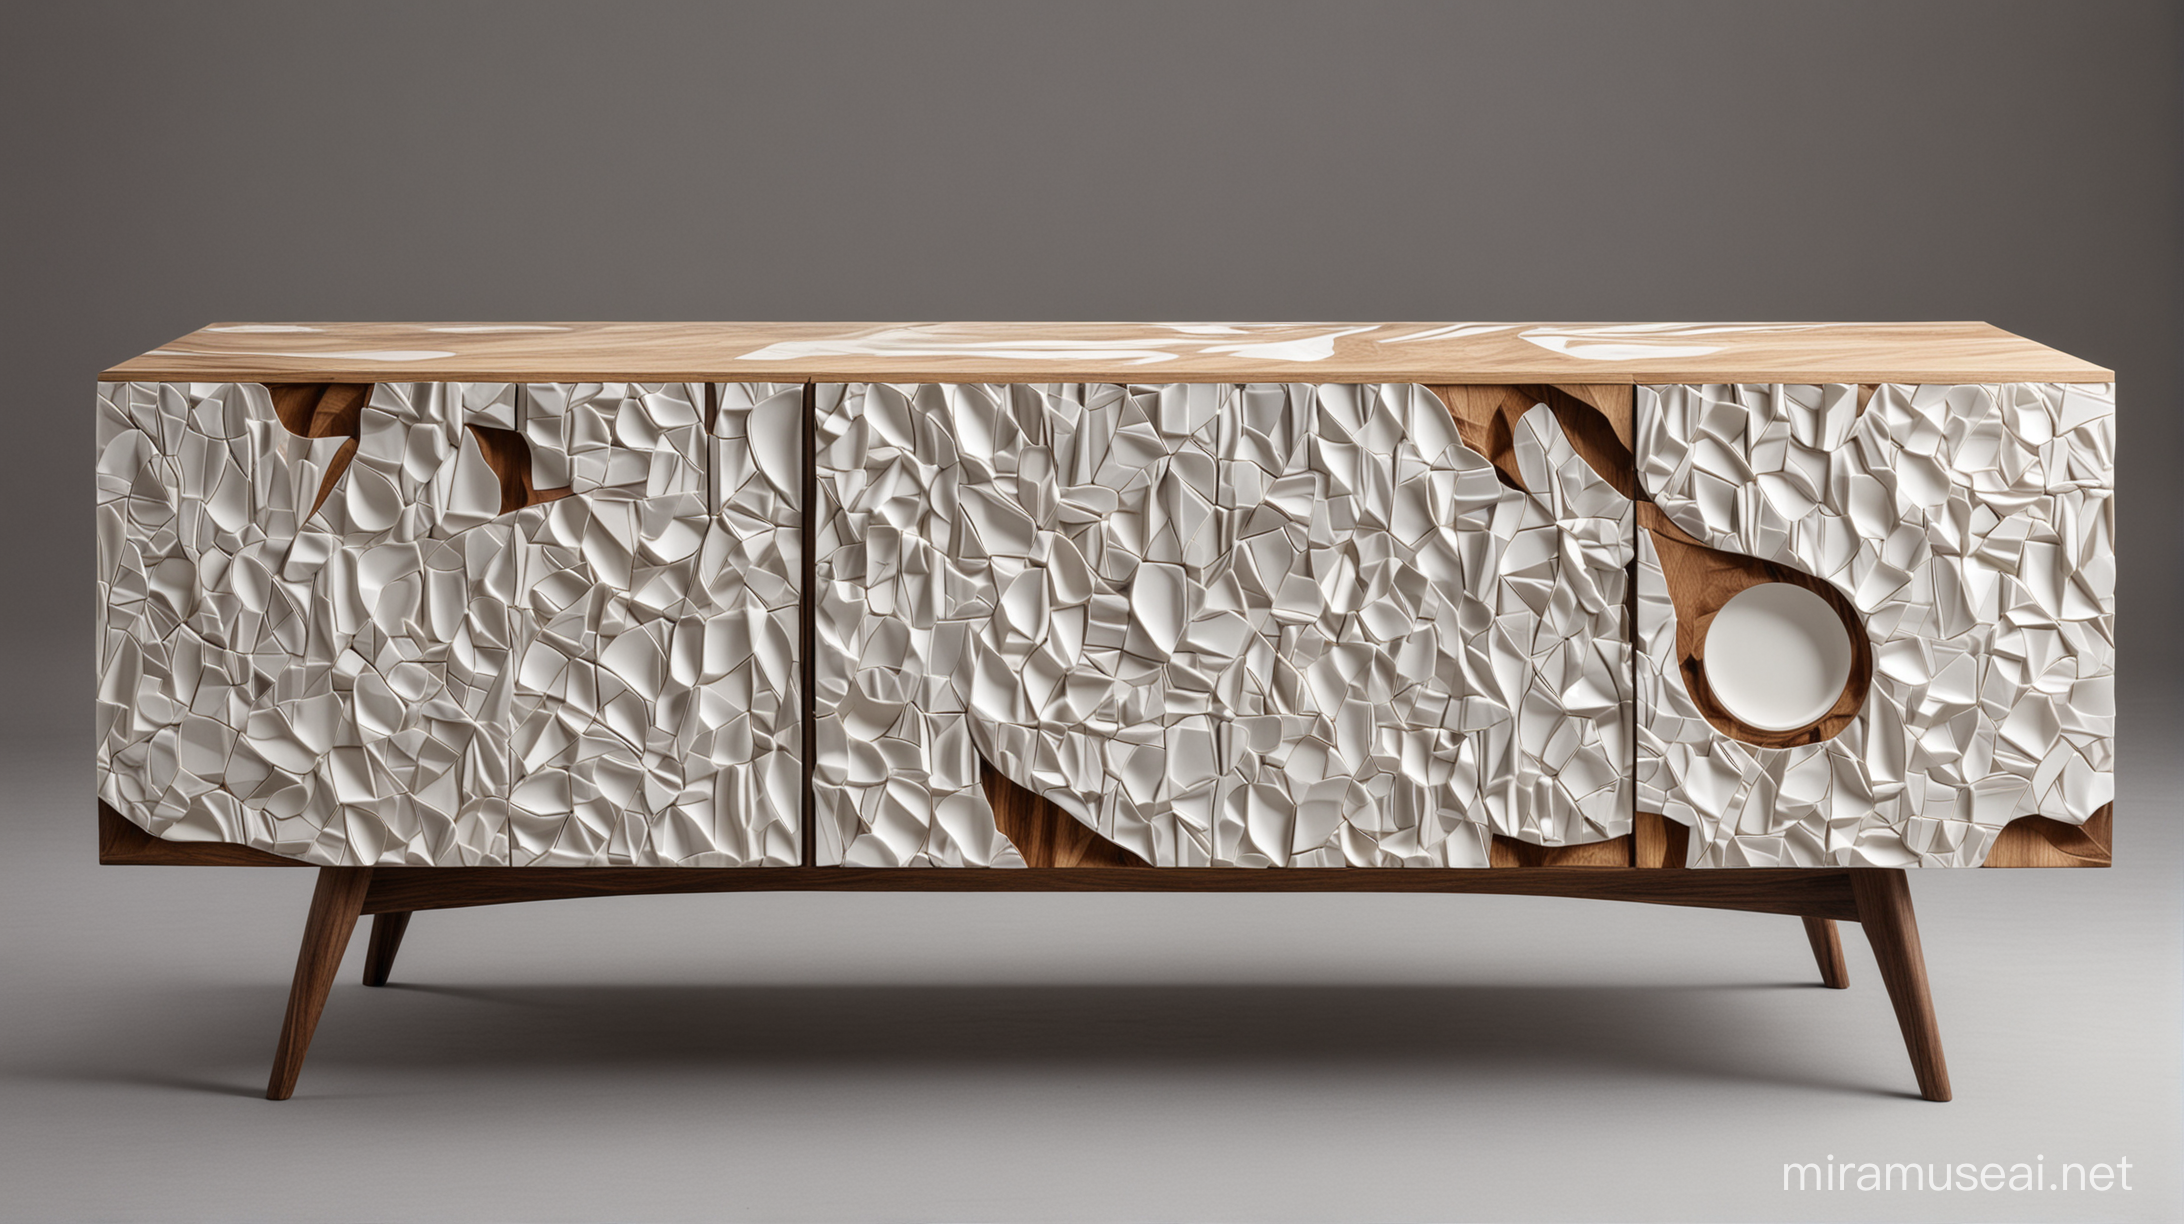 Creative Process Crafting Bespoke Modern Furniture from Ceramic Metal and Wood